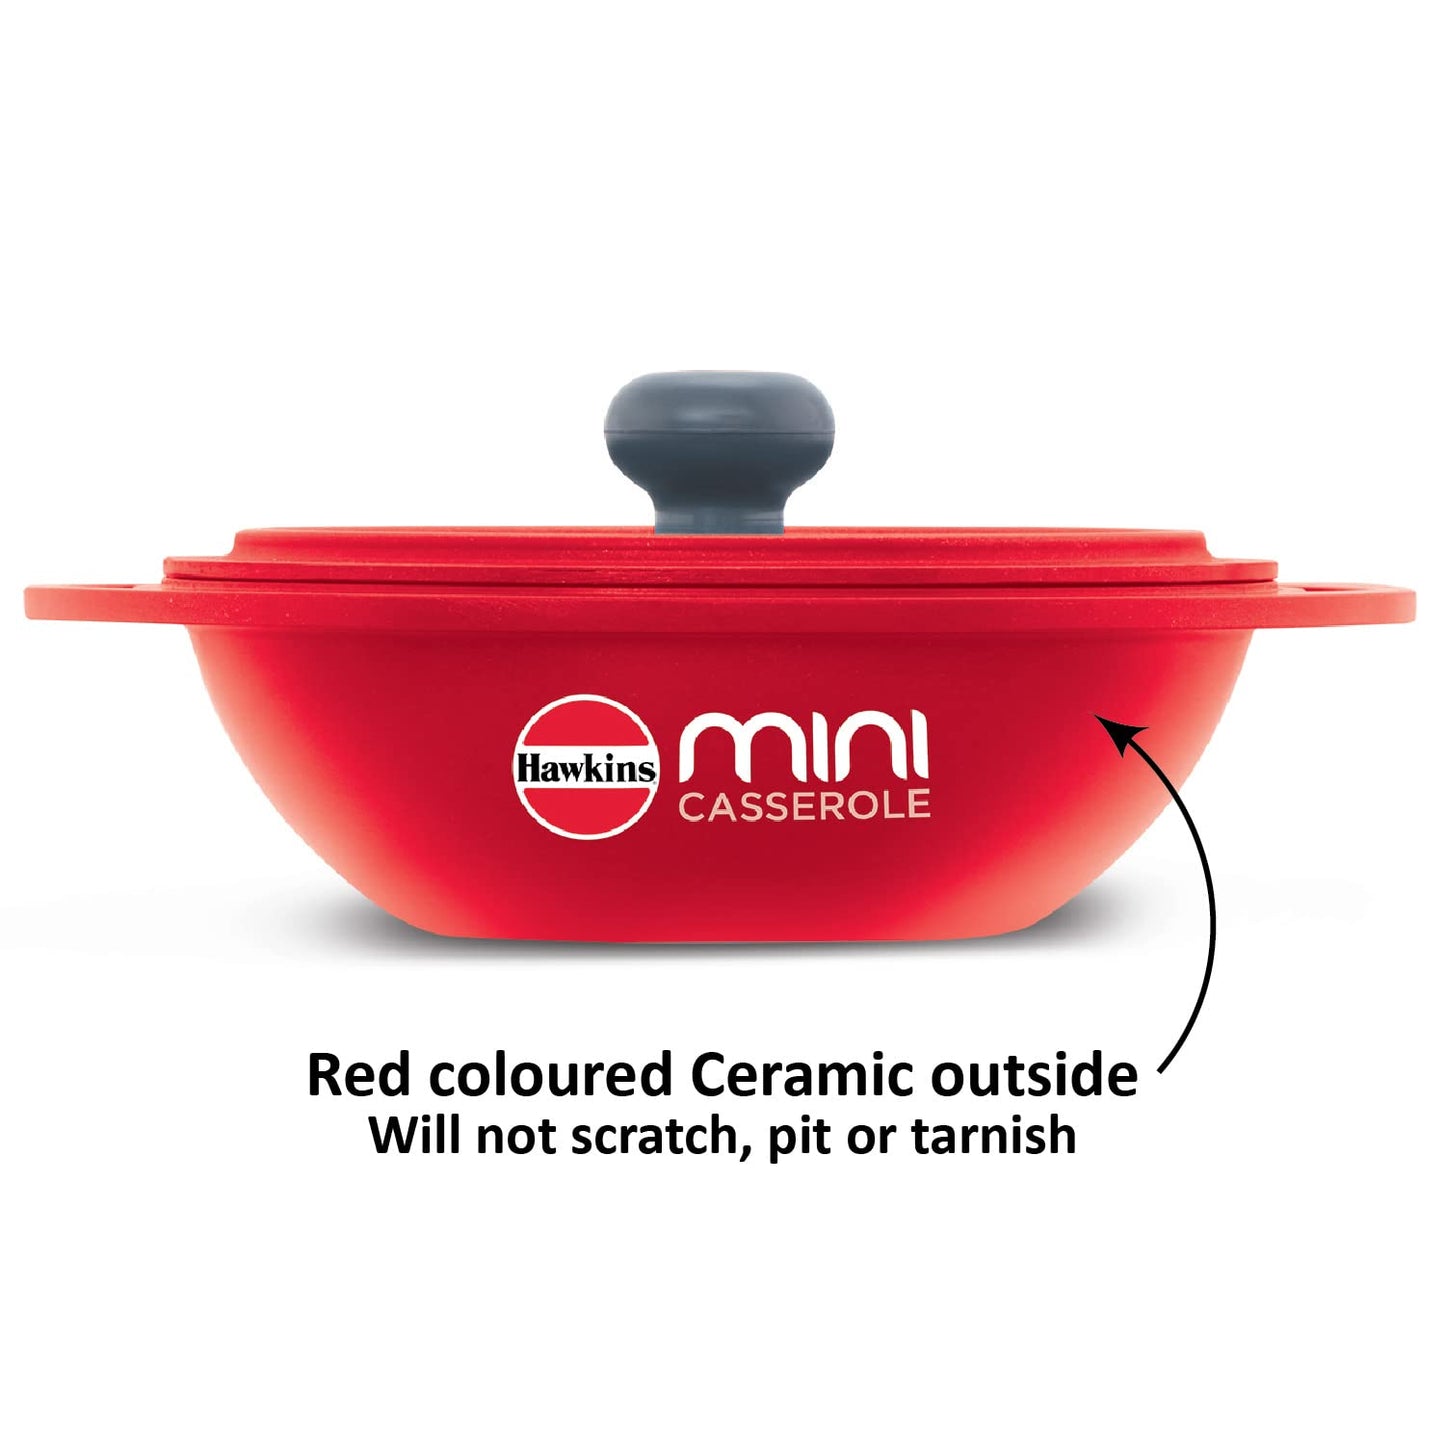 Hawkins Die-Cast Mini Casserole With Lid 0.75 Litres, Round Shaped Die-Cast pan for Cooking, Reheating, Serving and Storing, Red - MCRR75